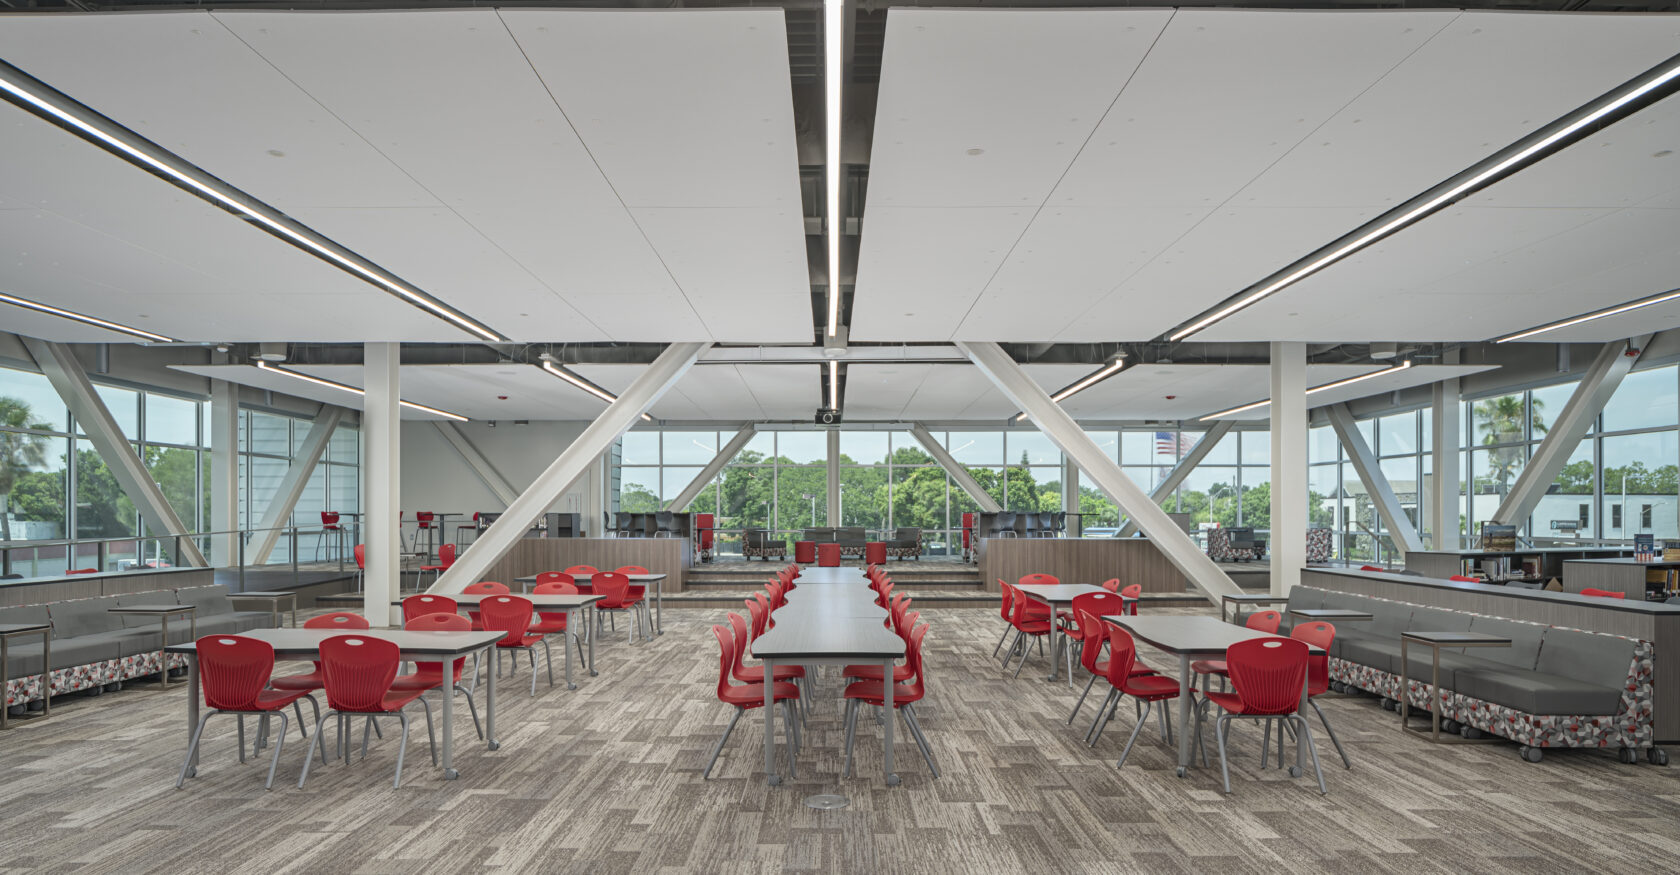 Clearwater High School Library Renovation one point perspective photo. Featuring tables in library